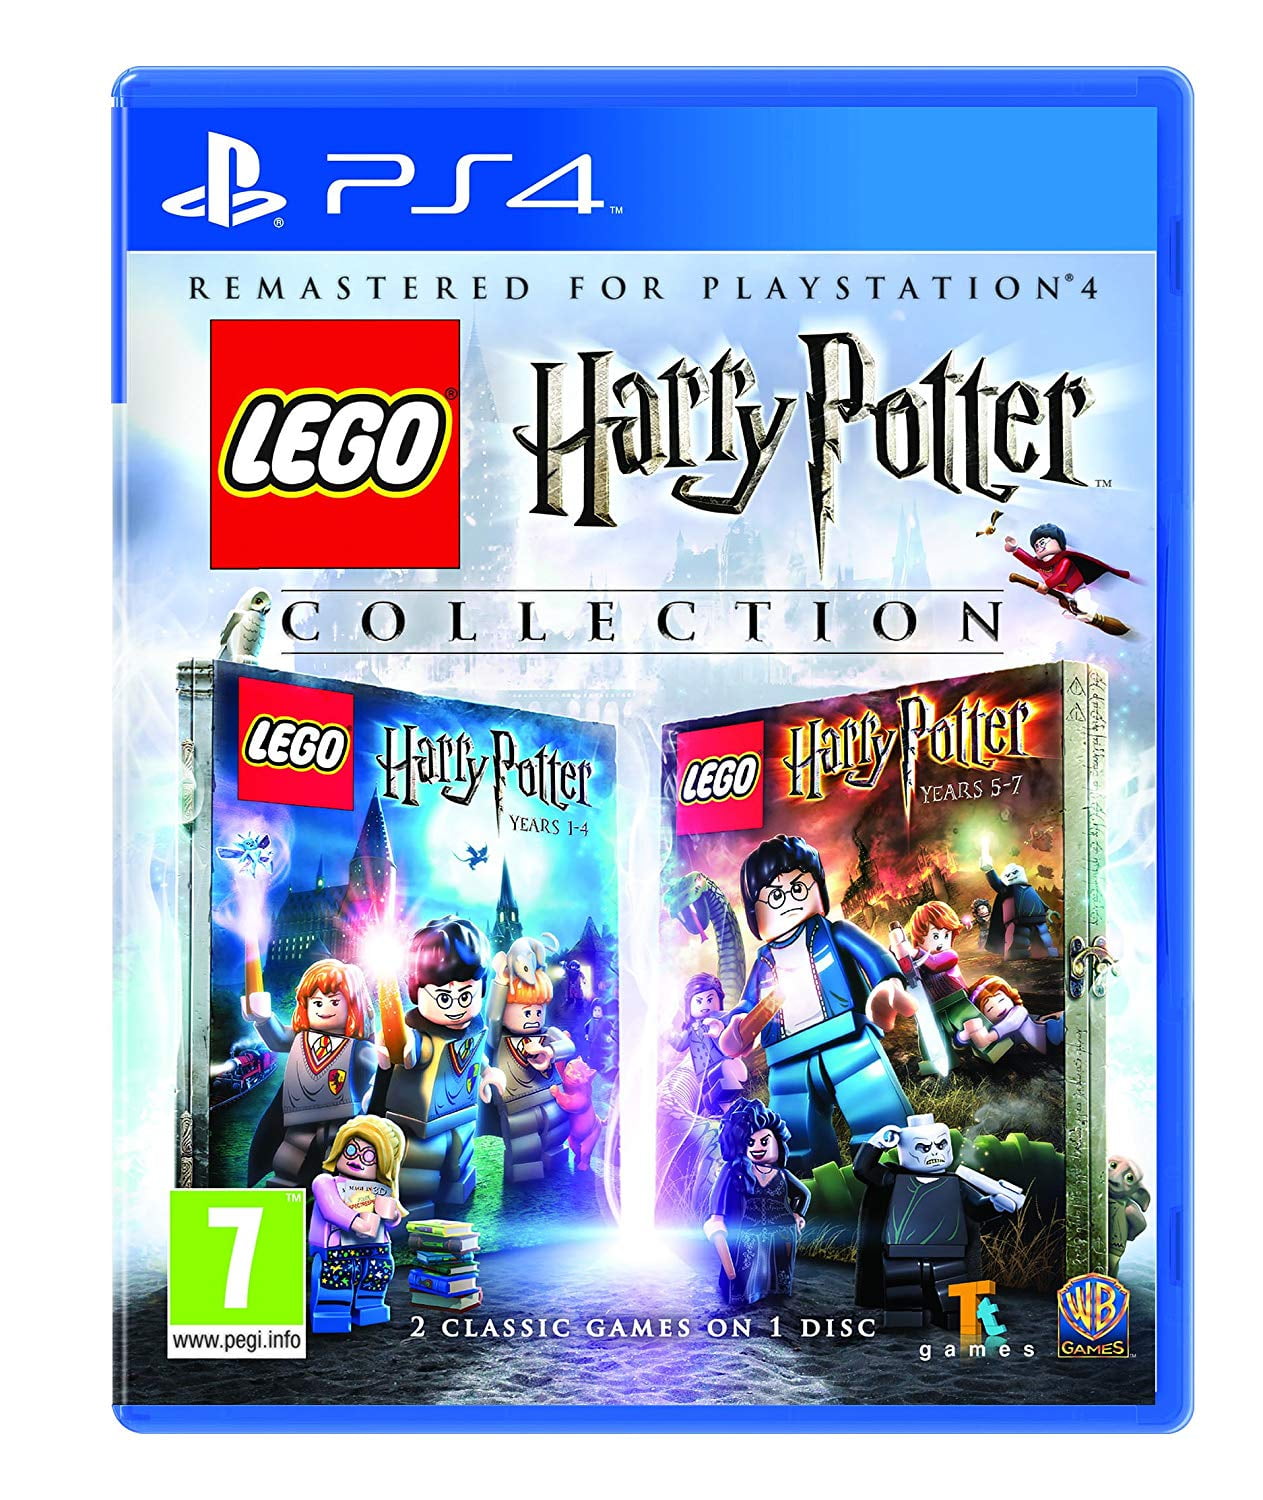 LEGO Harry Potter: Years 1-4 w/ FREE GIFT 🎁 • PC – Mikes Game Shop